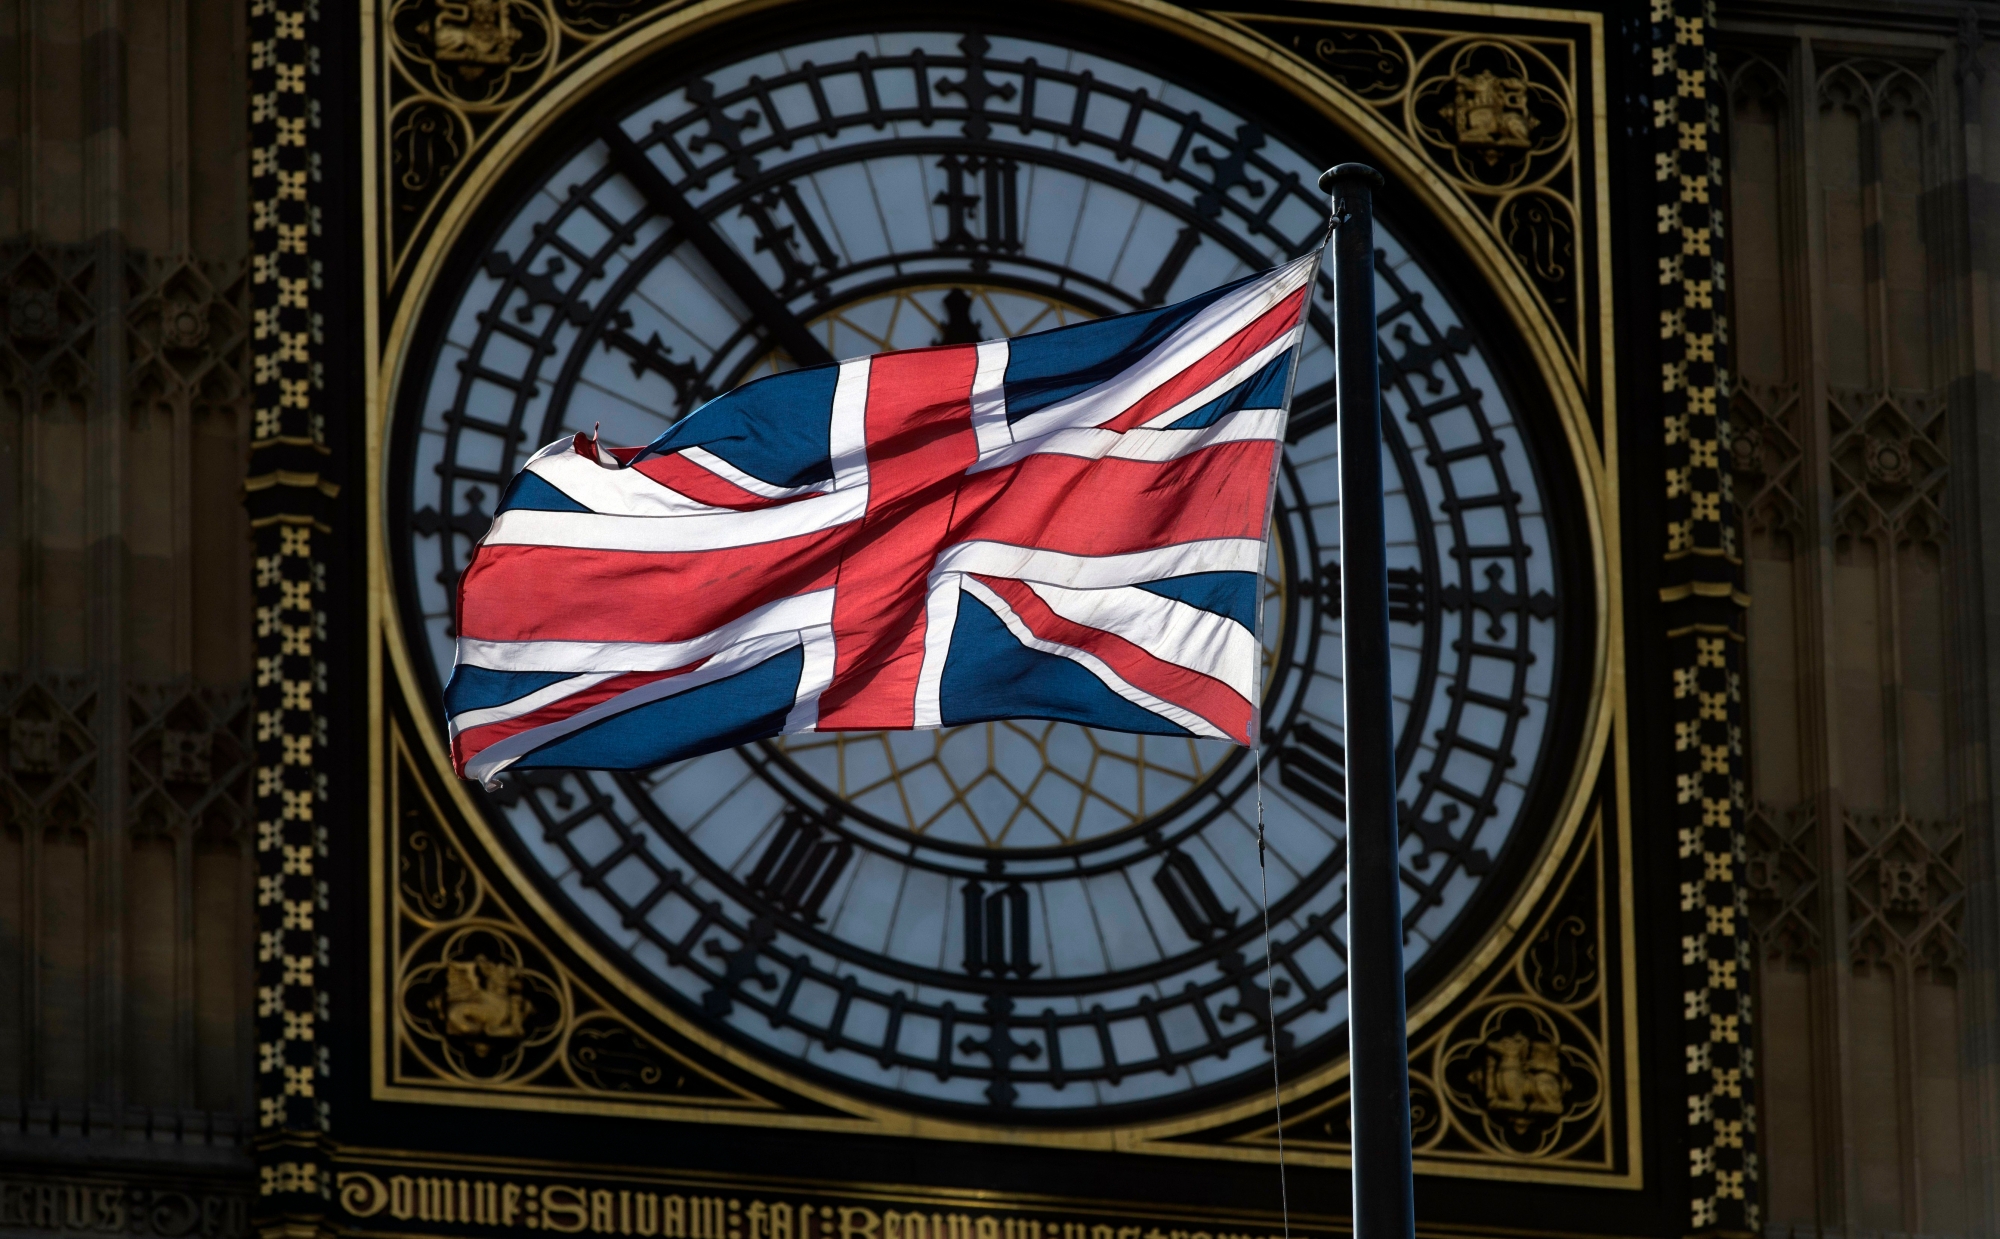 epa05838424 A Union flag flies in front of the clock on the Elizabeth tower at the Houses of Parliament, Central London, 09 March 2017.  EPA/WILL OLIVER BRITAIN PARLIAMENT POLITICS